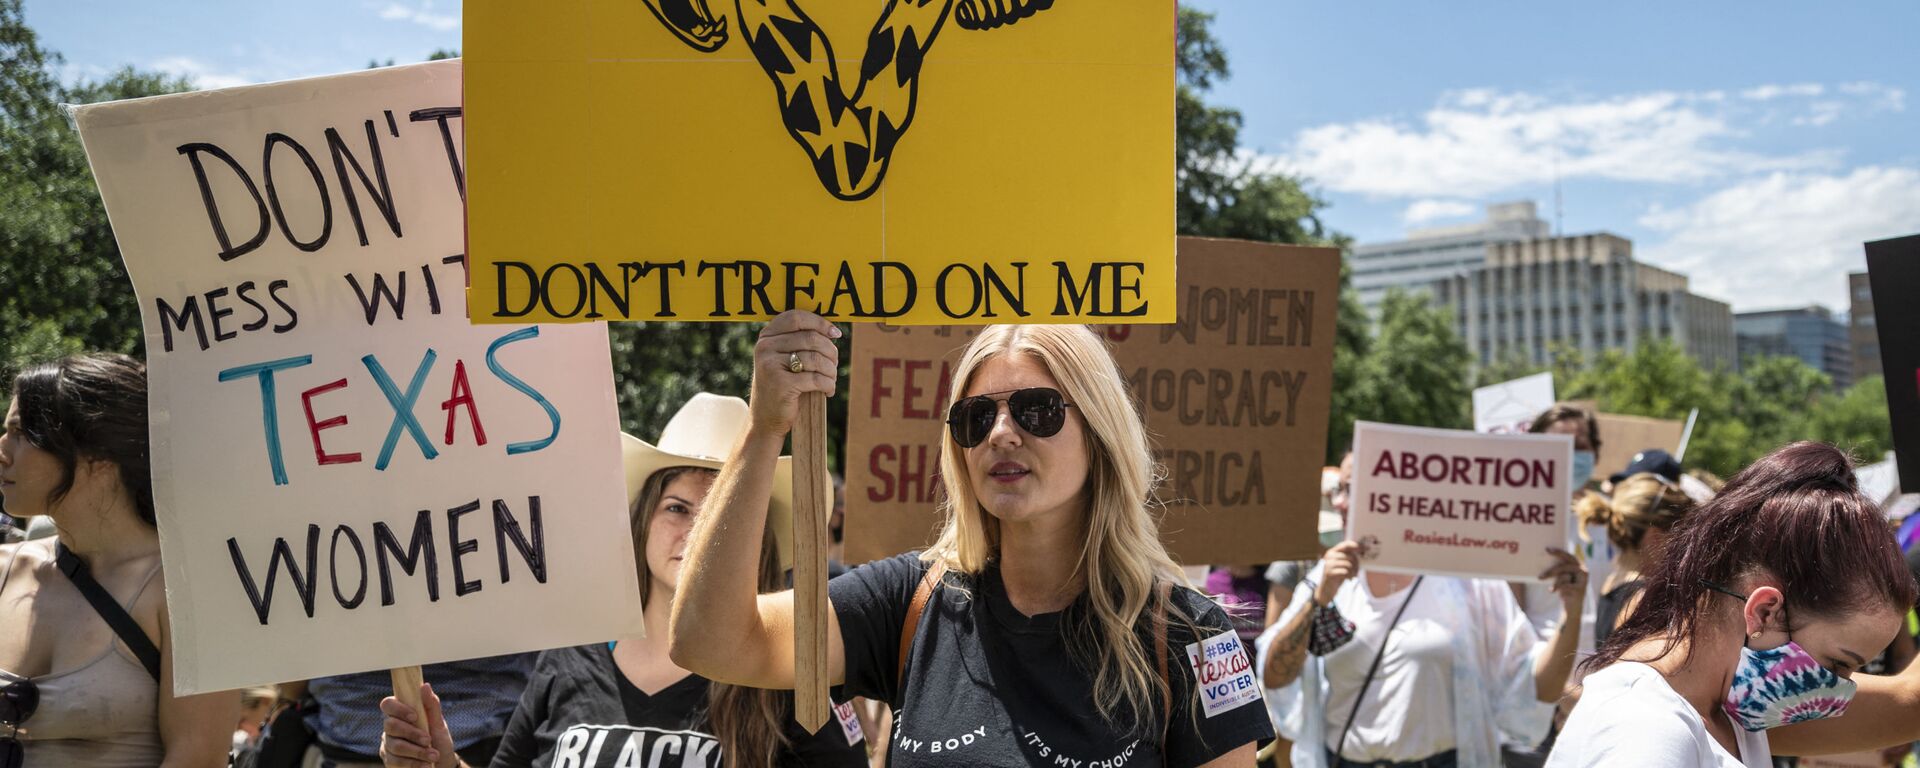 Protesters hold up signs at a protest outside the Texas state capitol on May 29, 2021 in Austin, Texas. - Sputnik International, 1920, 08.09.2021